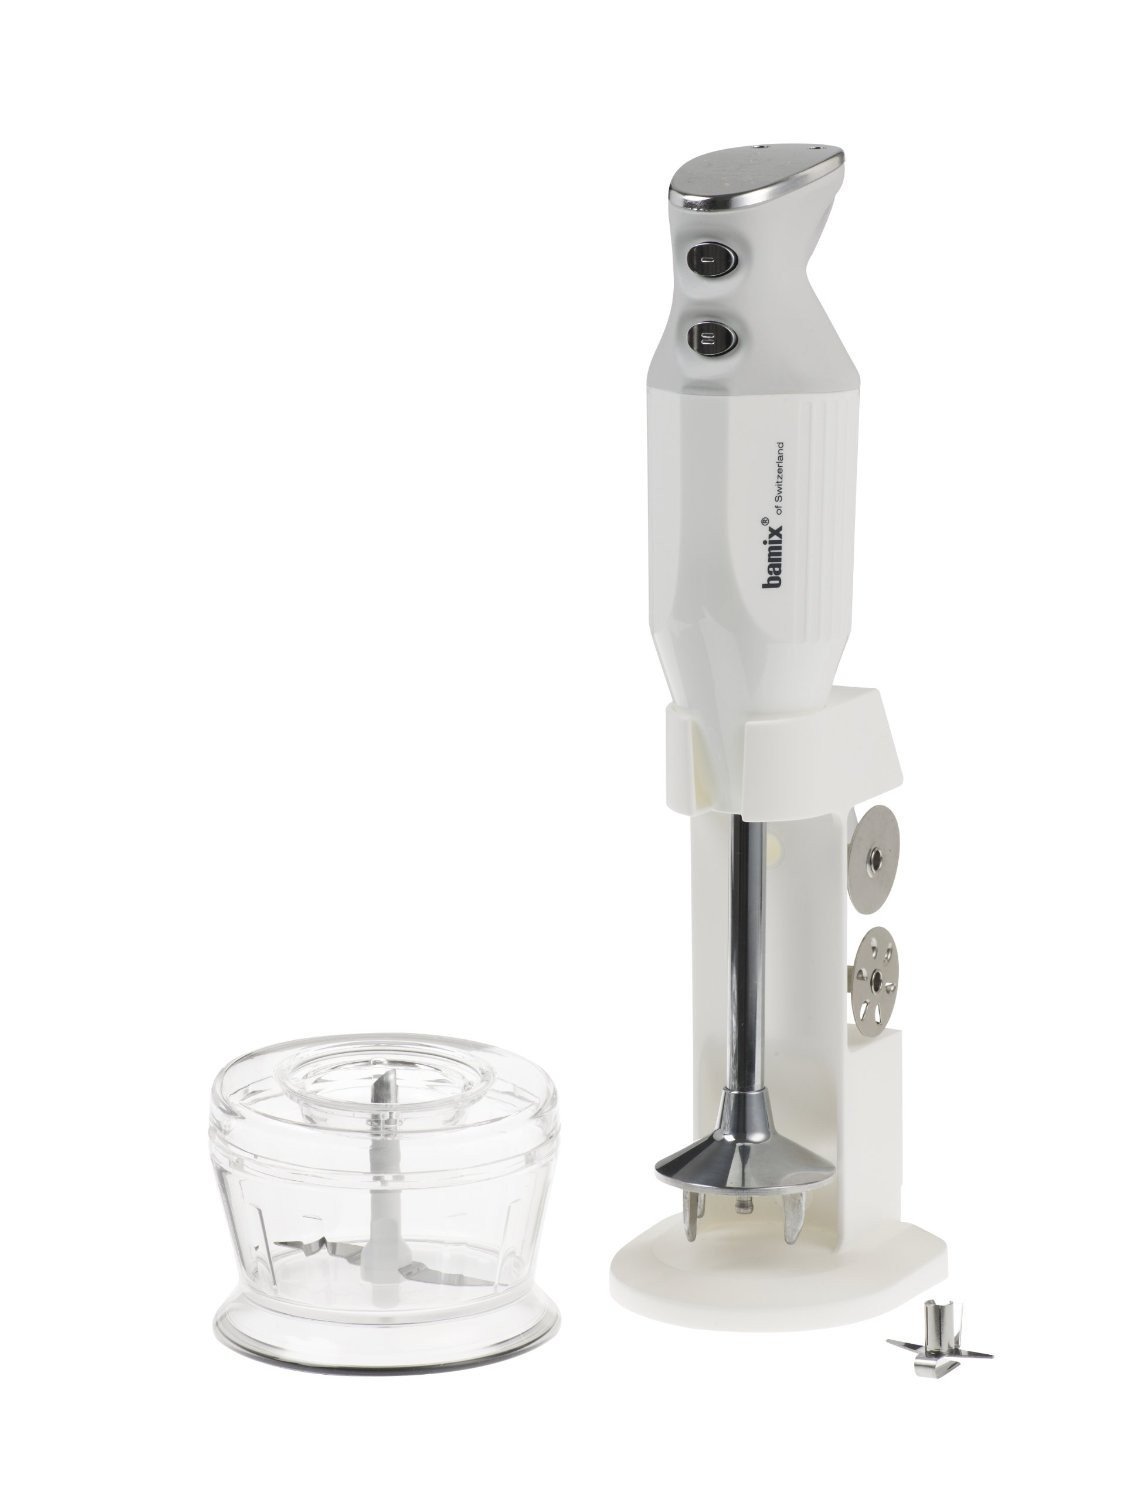 Bamix Deluxe M150 Immersion Hand Blender with Dry Grinder and